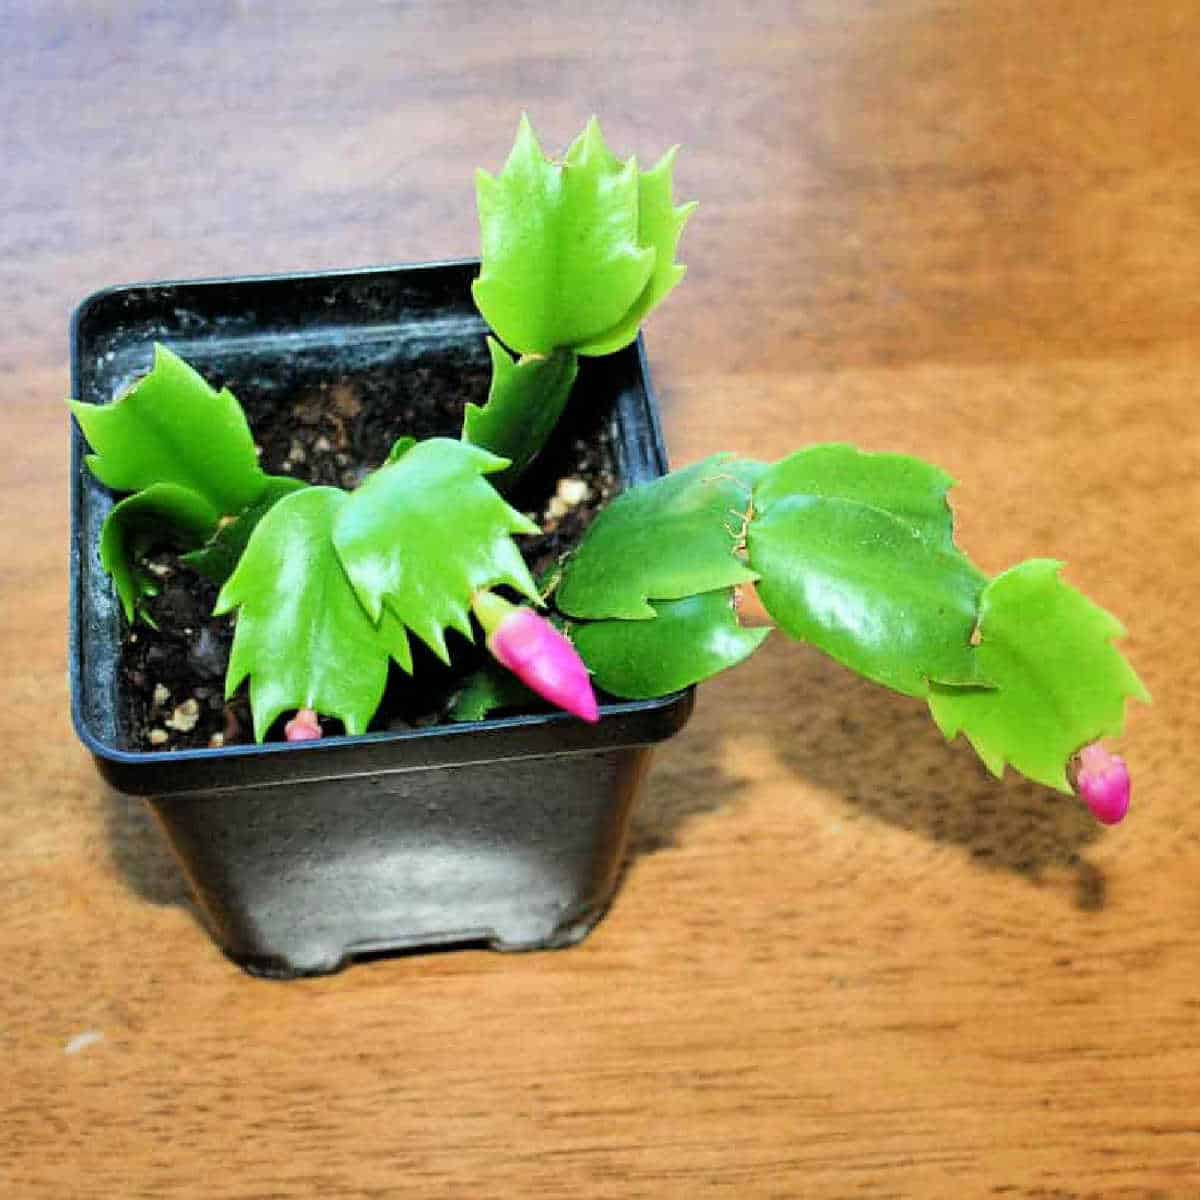 a young Christmas cactus grown from a parent plant